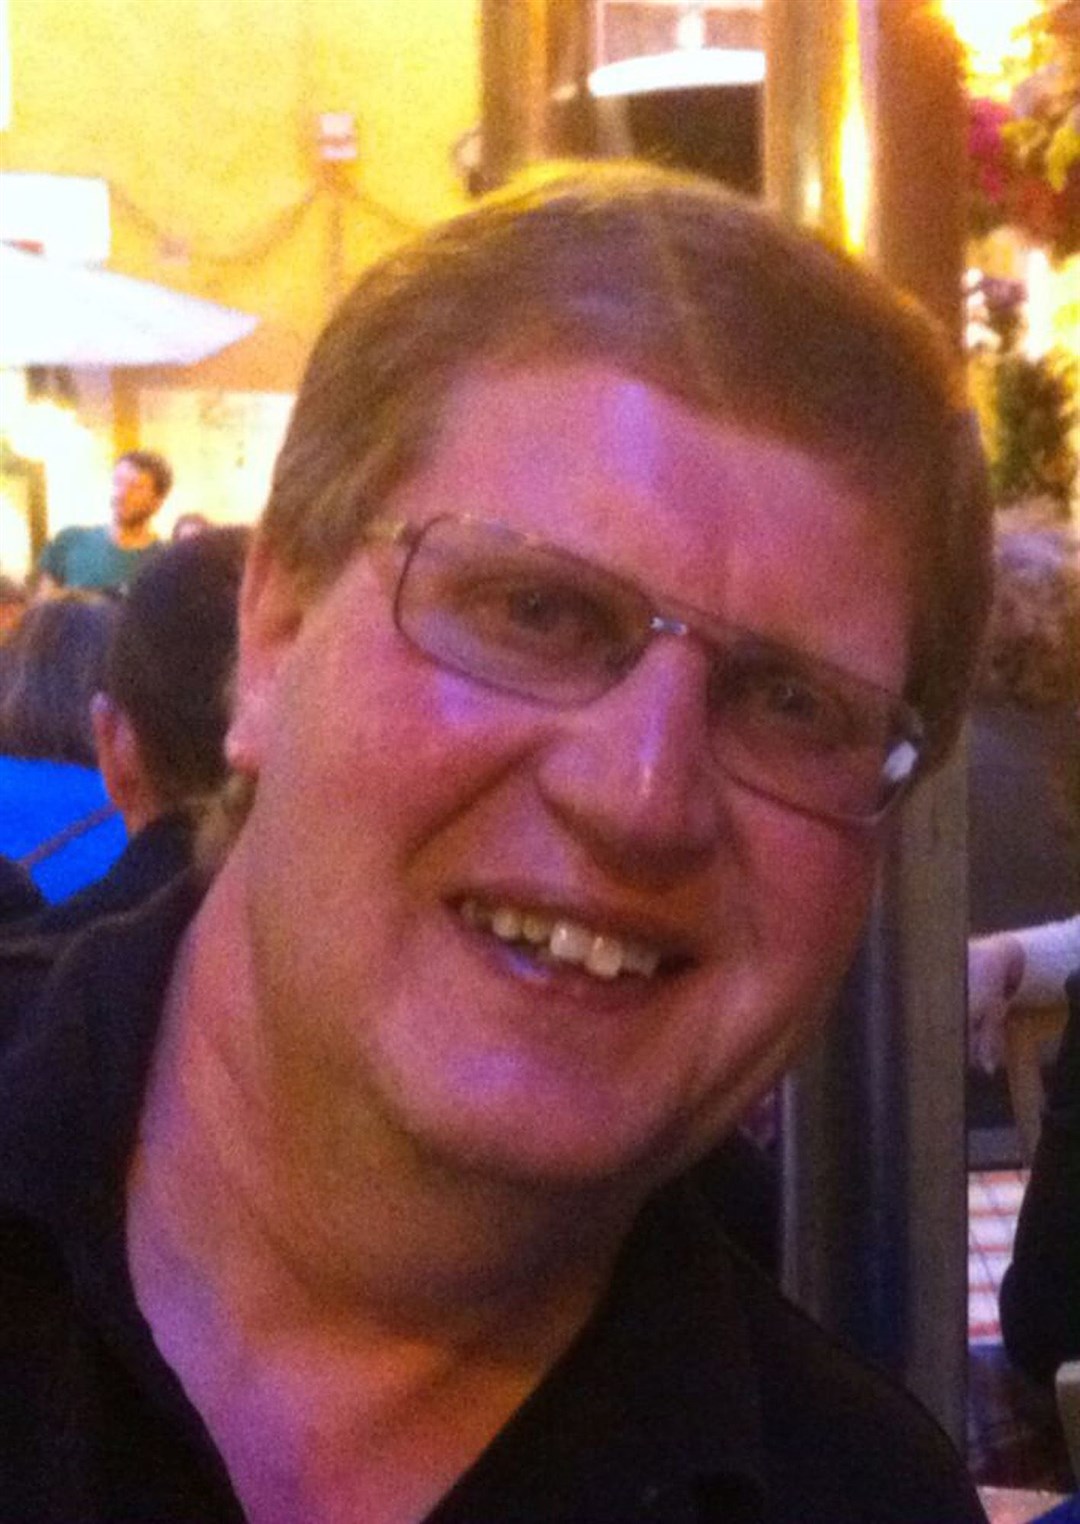 Crystal Palace fan Philip Seary, 57, died in the derailment (Family handout/PA)